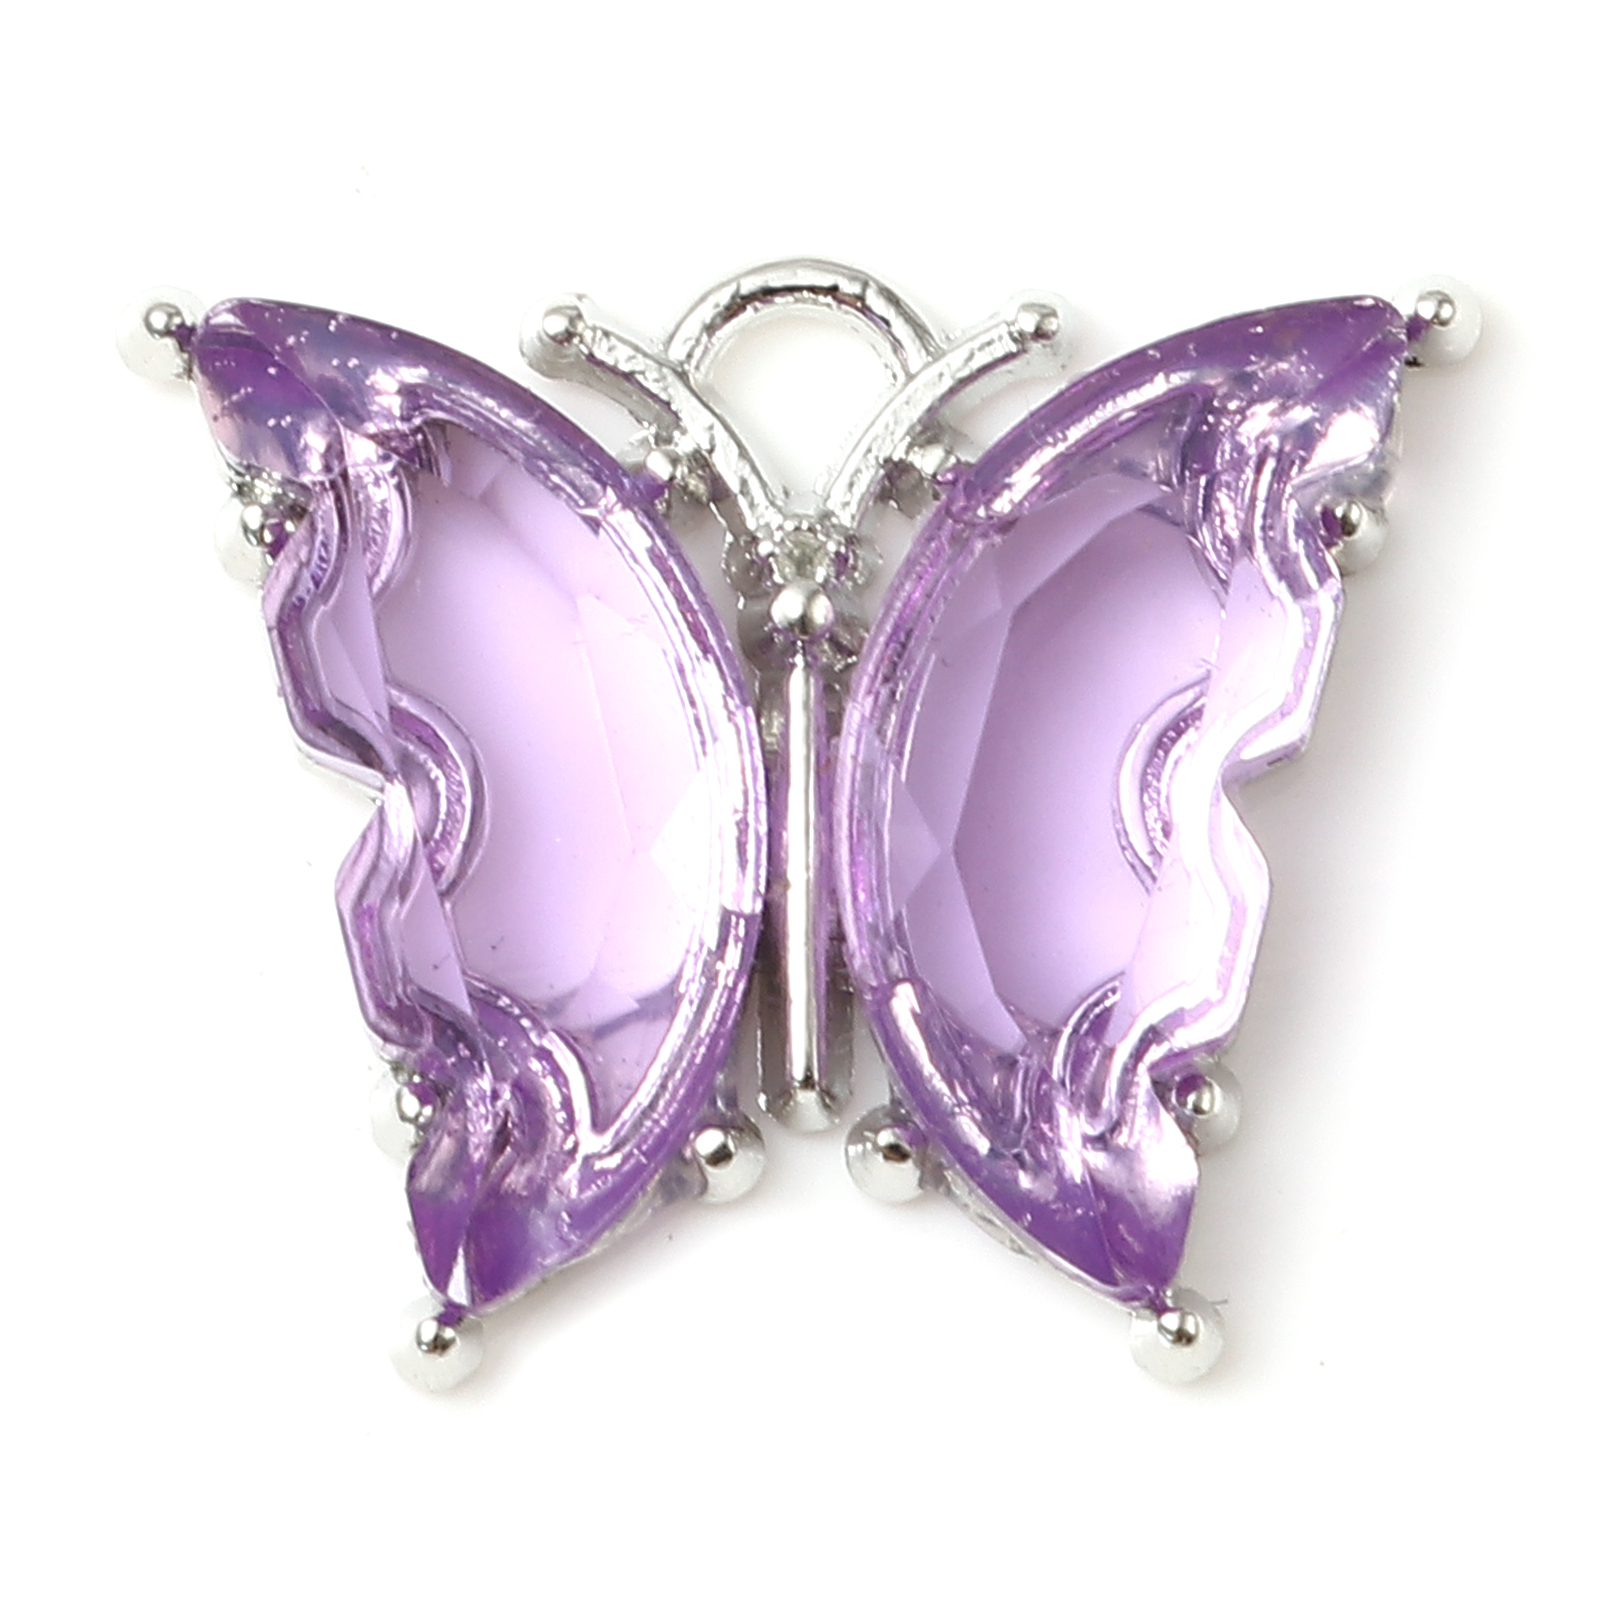 Picture of Zinc Based Alloy & Resin Insect Charms Butterfly Animal Silver Tone Purple 23mm x 19mm - 22mm x 19mm, 10 PCs